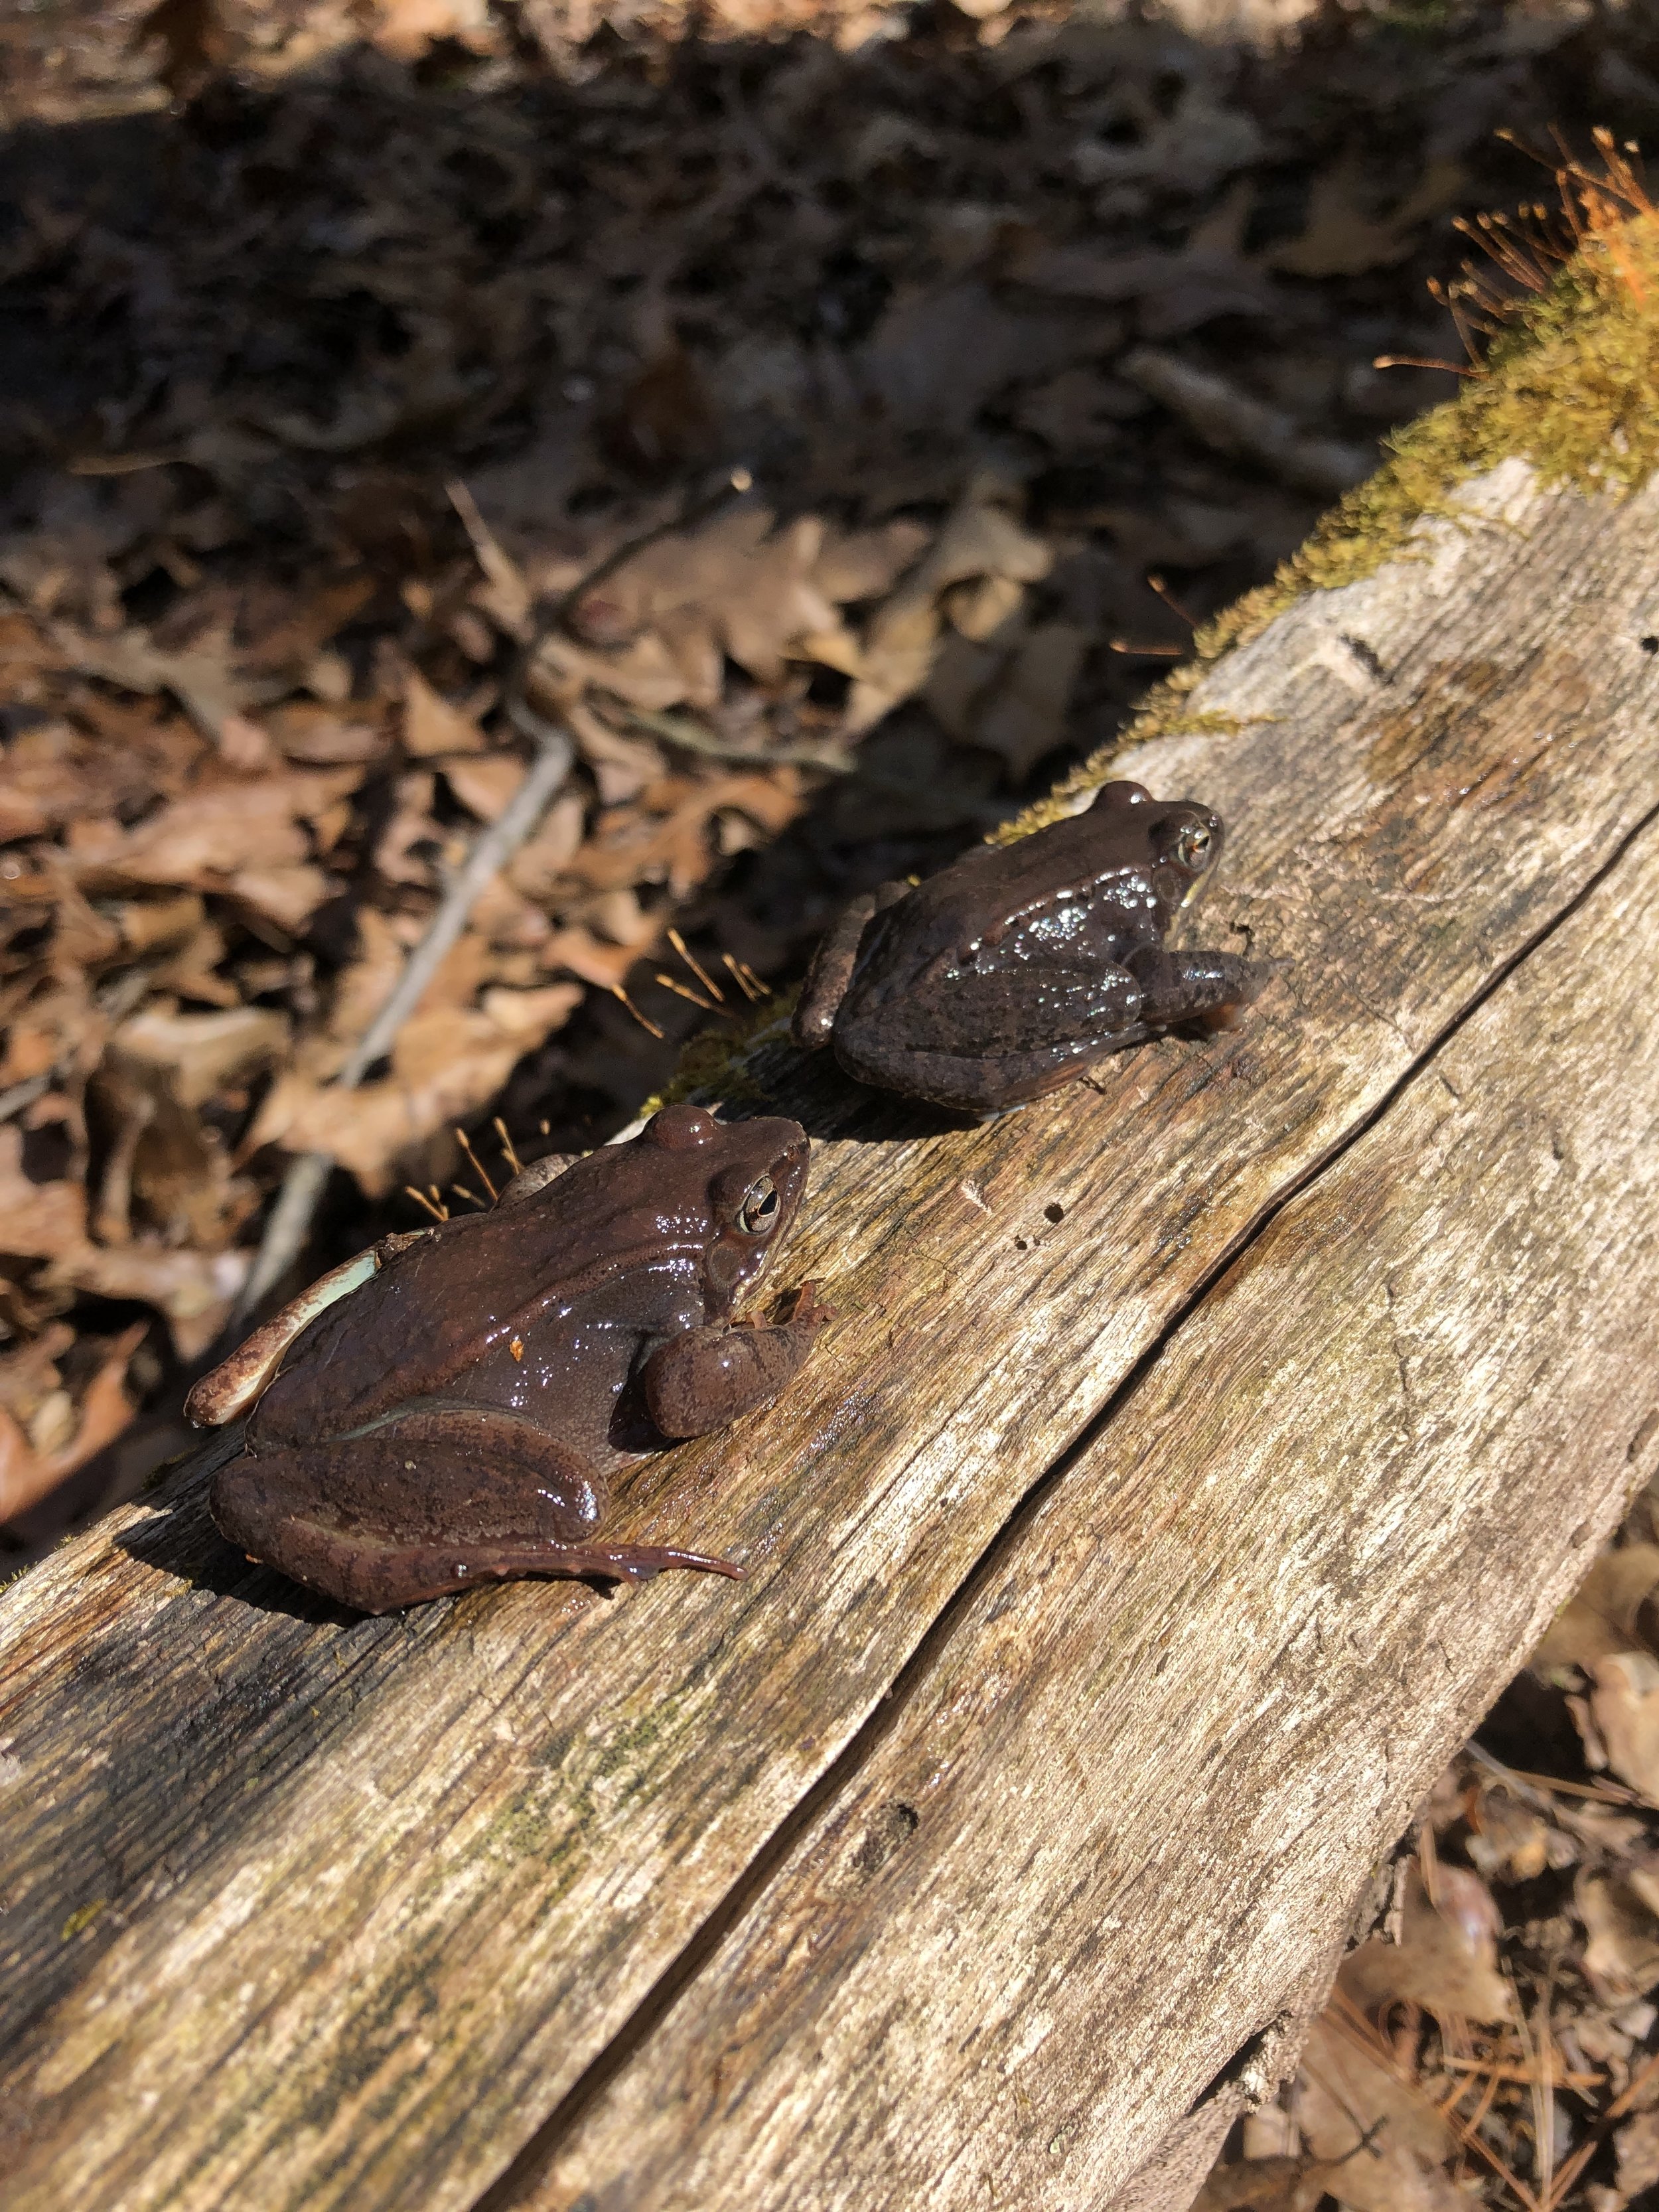 Two wood frogs on a log, both of different colors